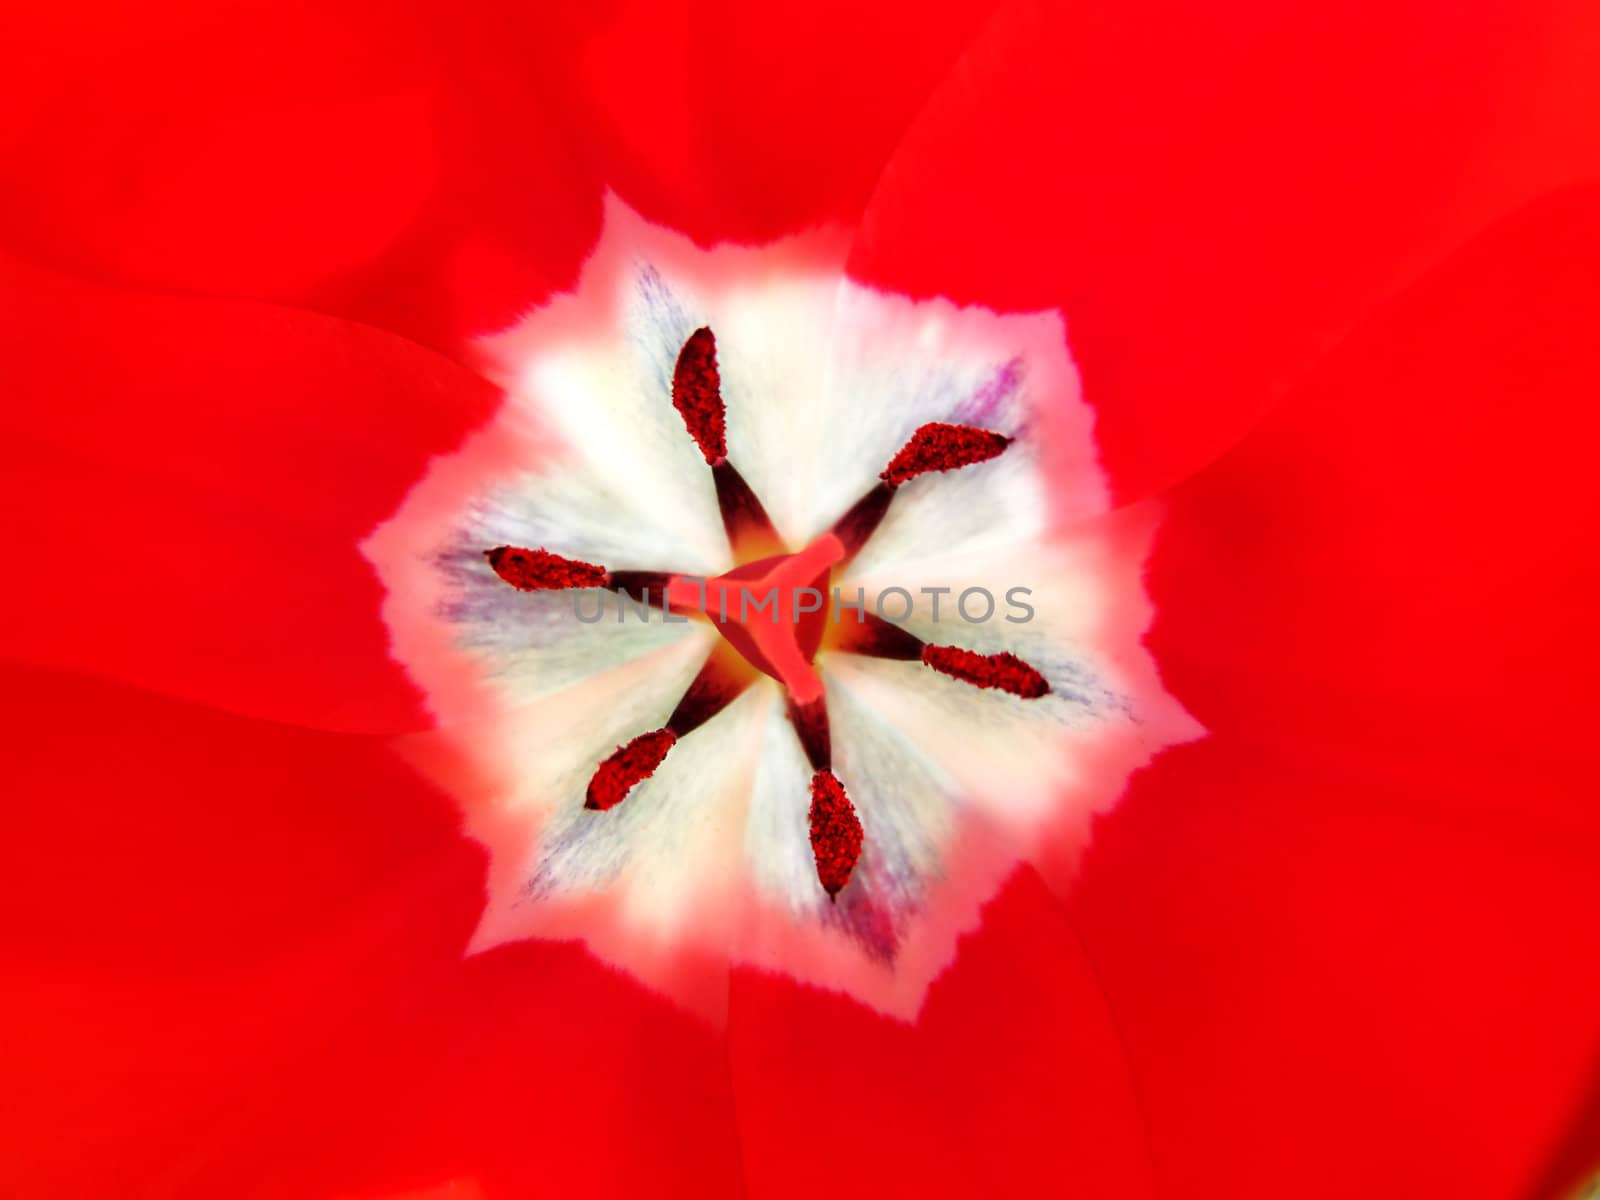 Inside red tulip by Mirage3